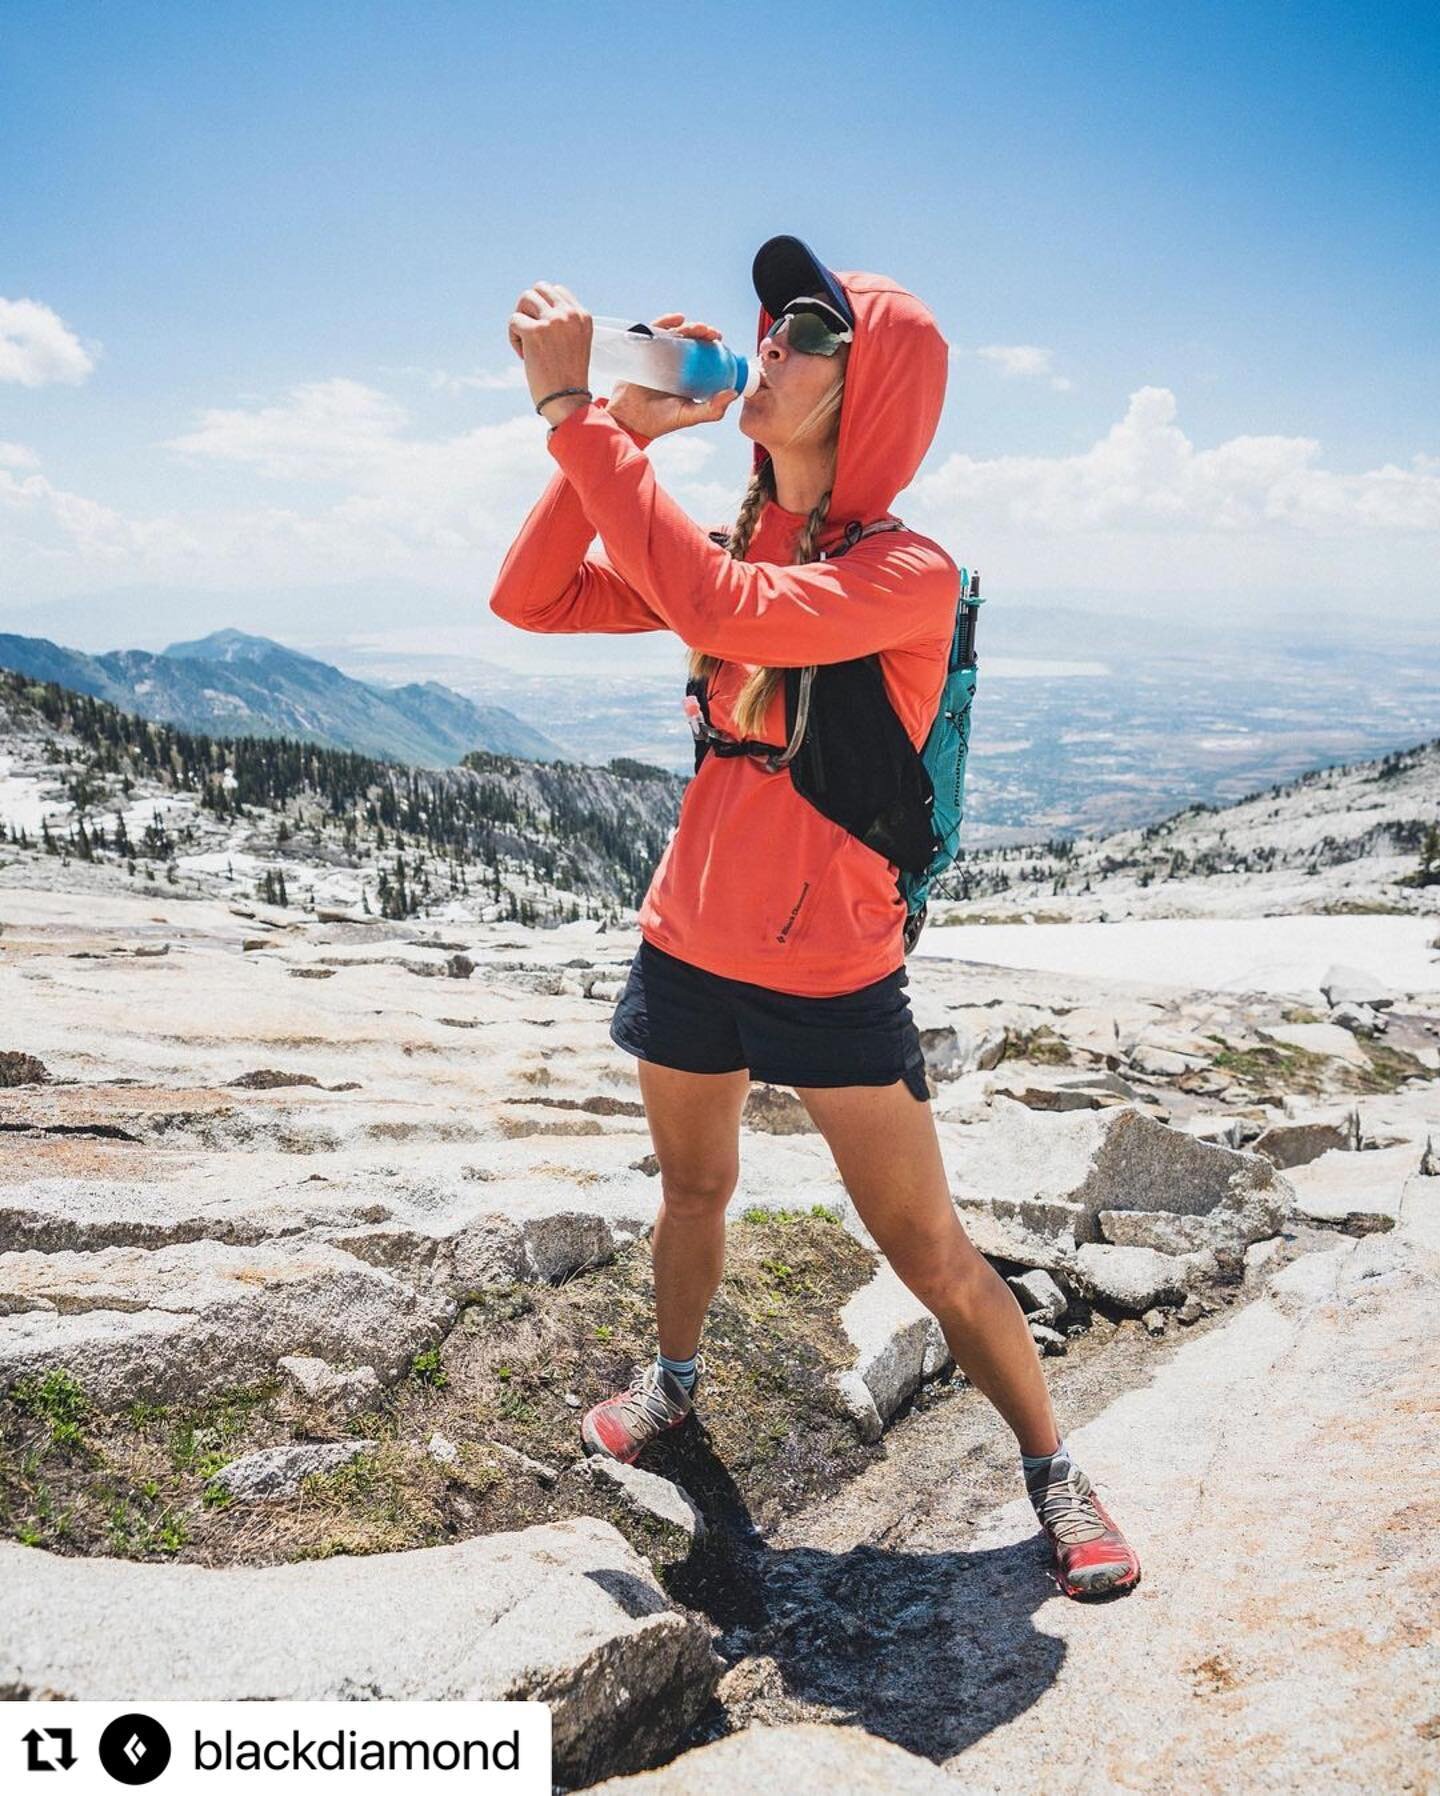 Hydrate or diedrate&mdash;@kyehalpin knows the way.

The Alpenglow Hoody keeps you covered on long approaches and sunny sessions when sunscreen just isn&rsquo;t enough, and the Distance 8 Backpack provides you plenty of space for water, fuel, and too